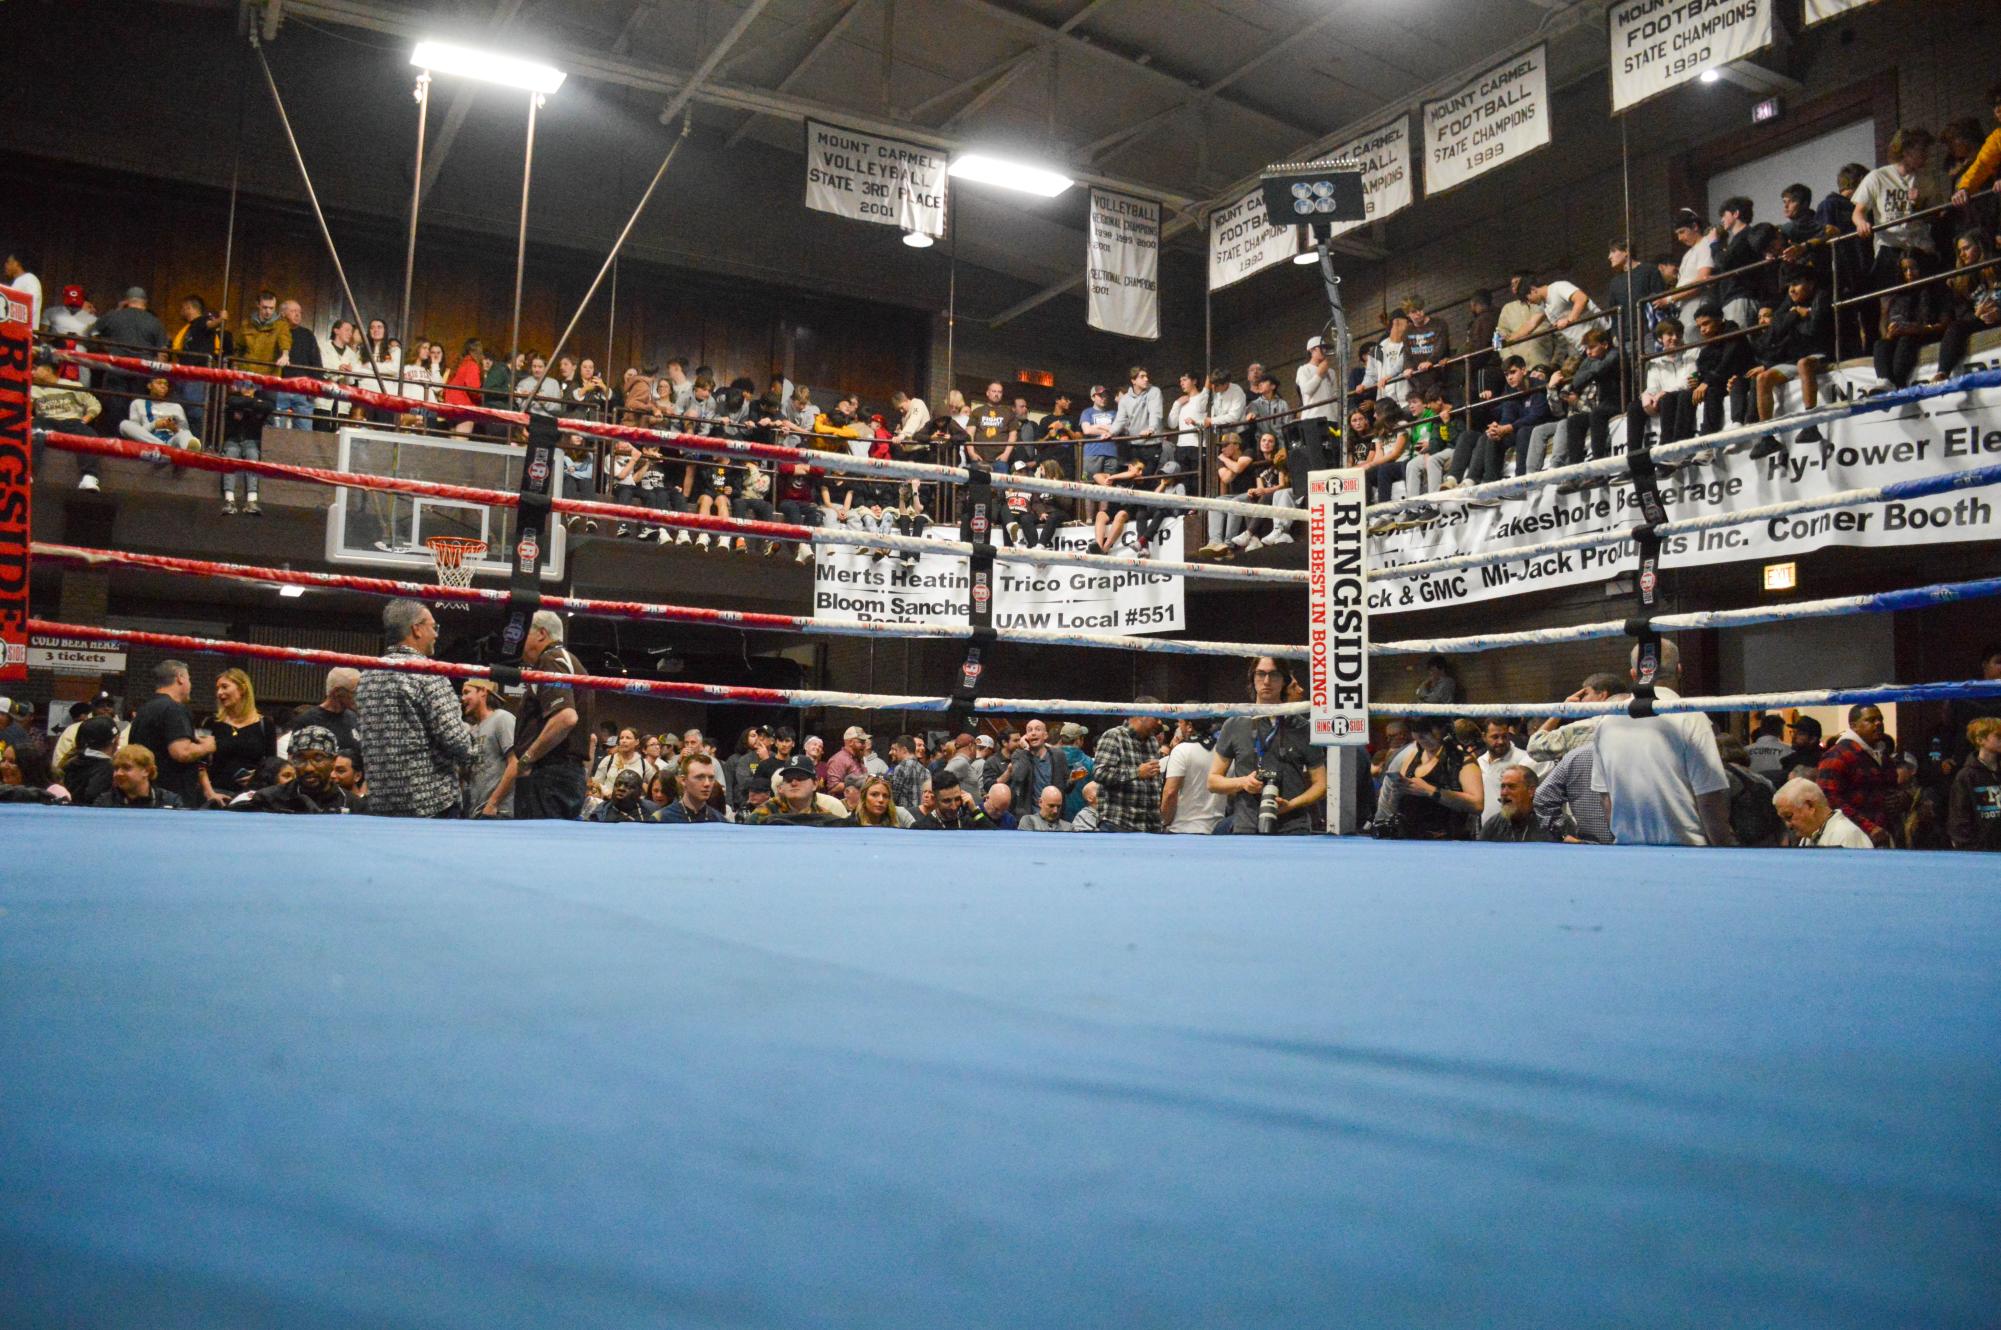 Every Fight Night, the MC community packs the Alumni Gym for this big night.